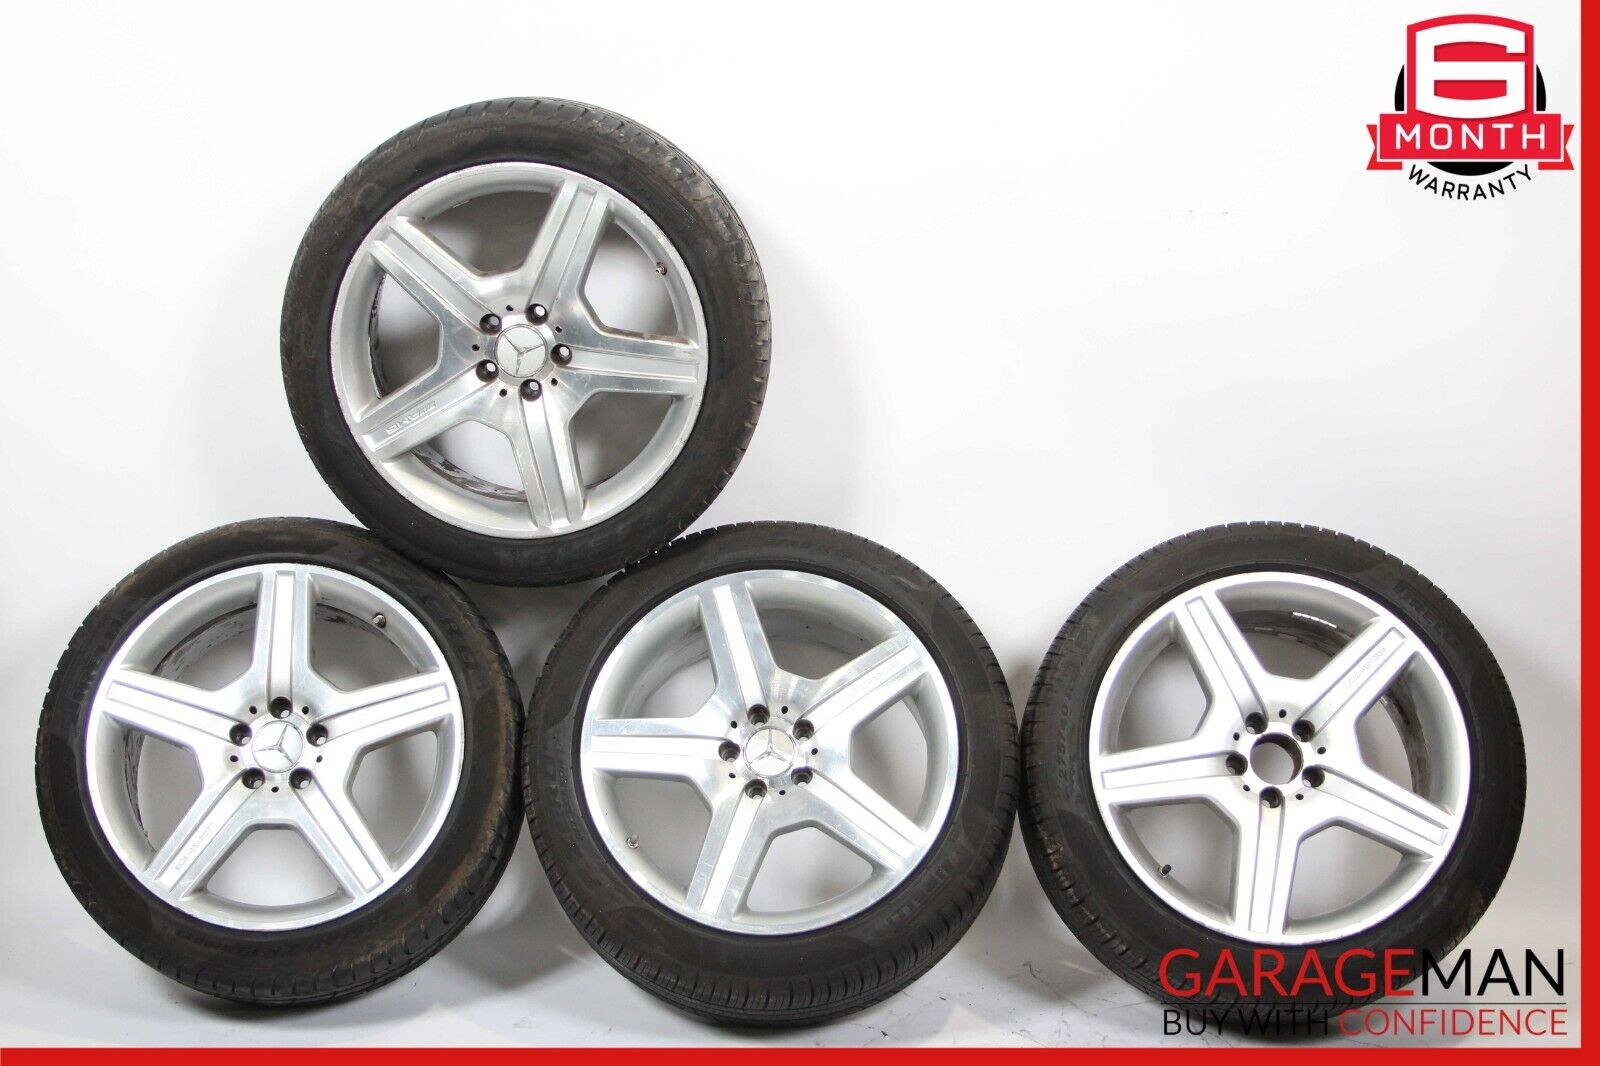 07-14 Mercedes S350 CL500 Factory Staggered 9.5x8.5 Wheel Tire Rim Set of 4 R19